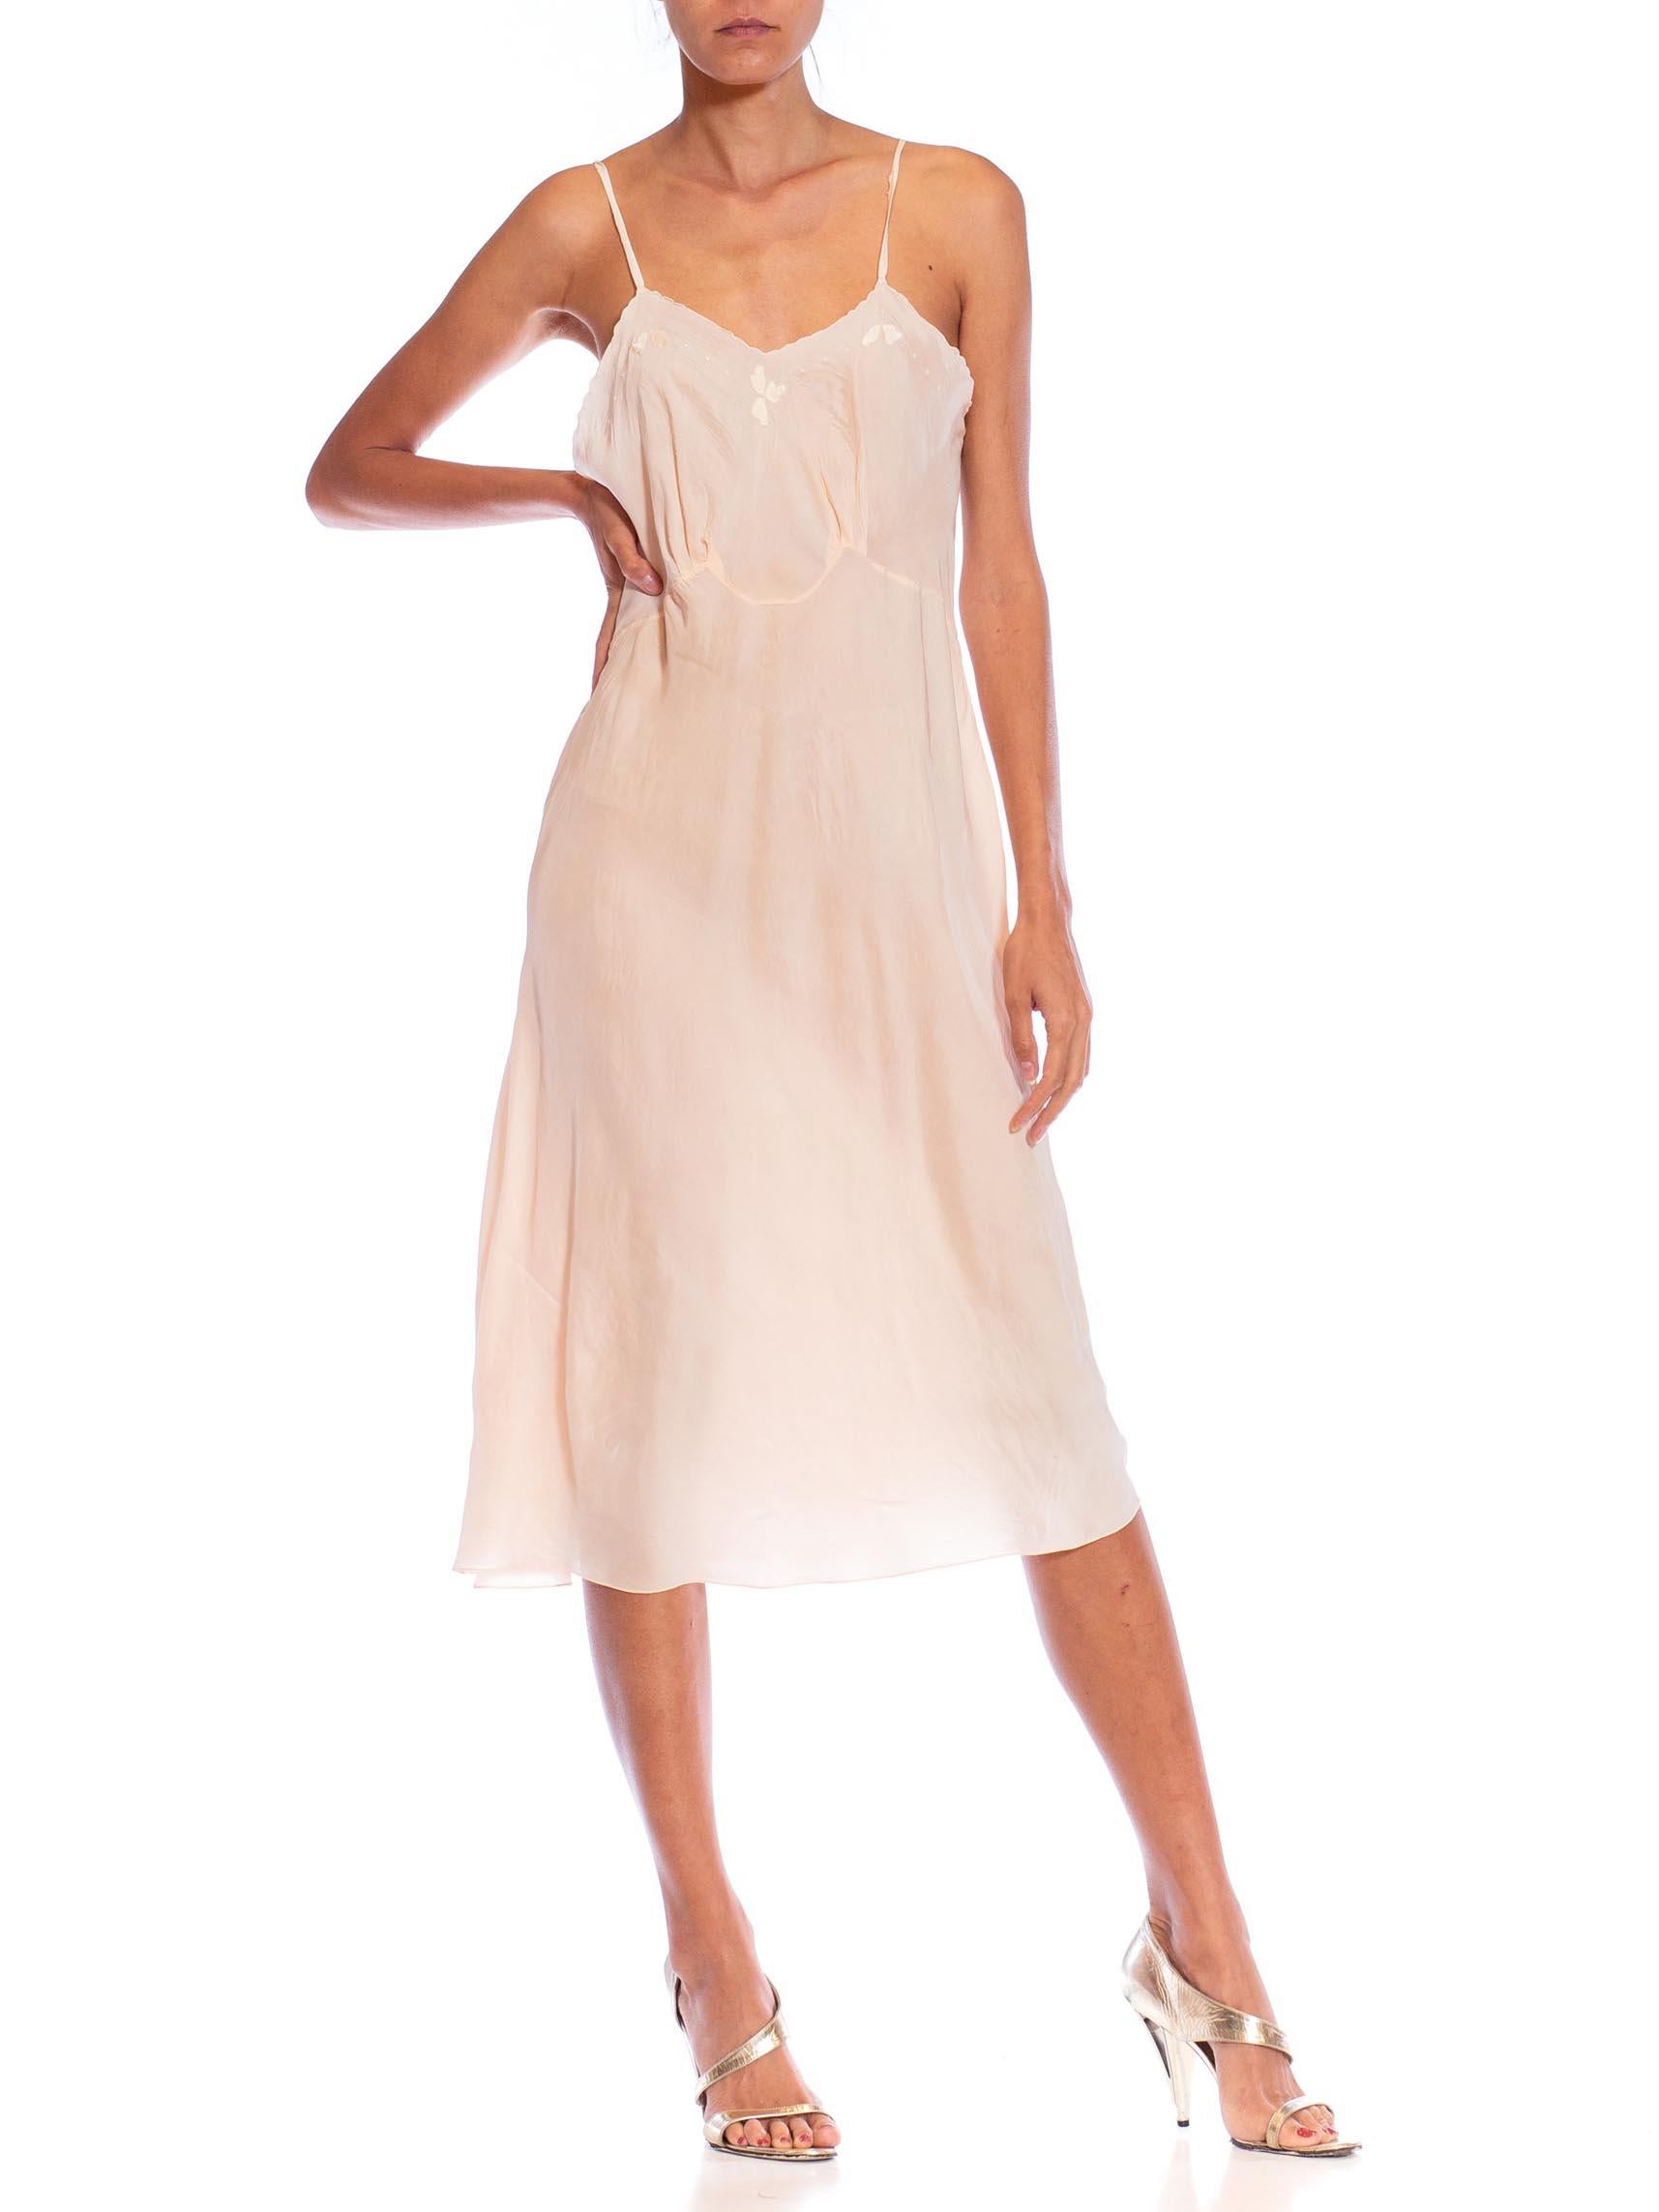 1940S Peach Bias Cut Silk Charmeuse Slip In Excellent Condition For Sale In New York, NY